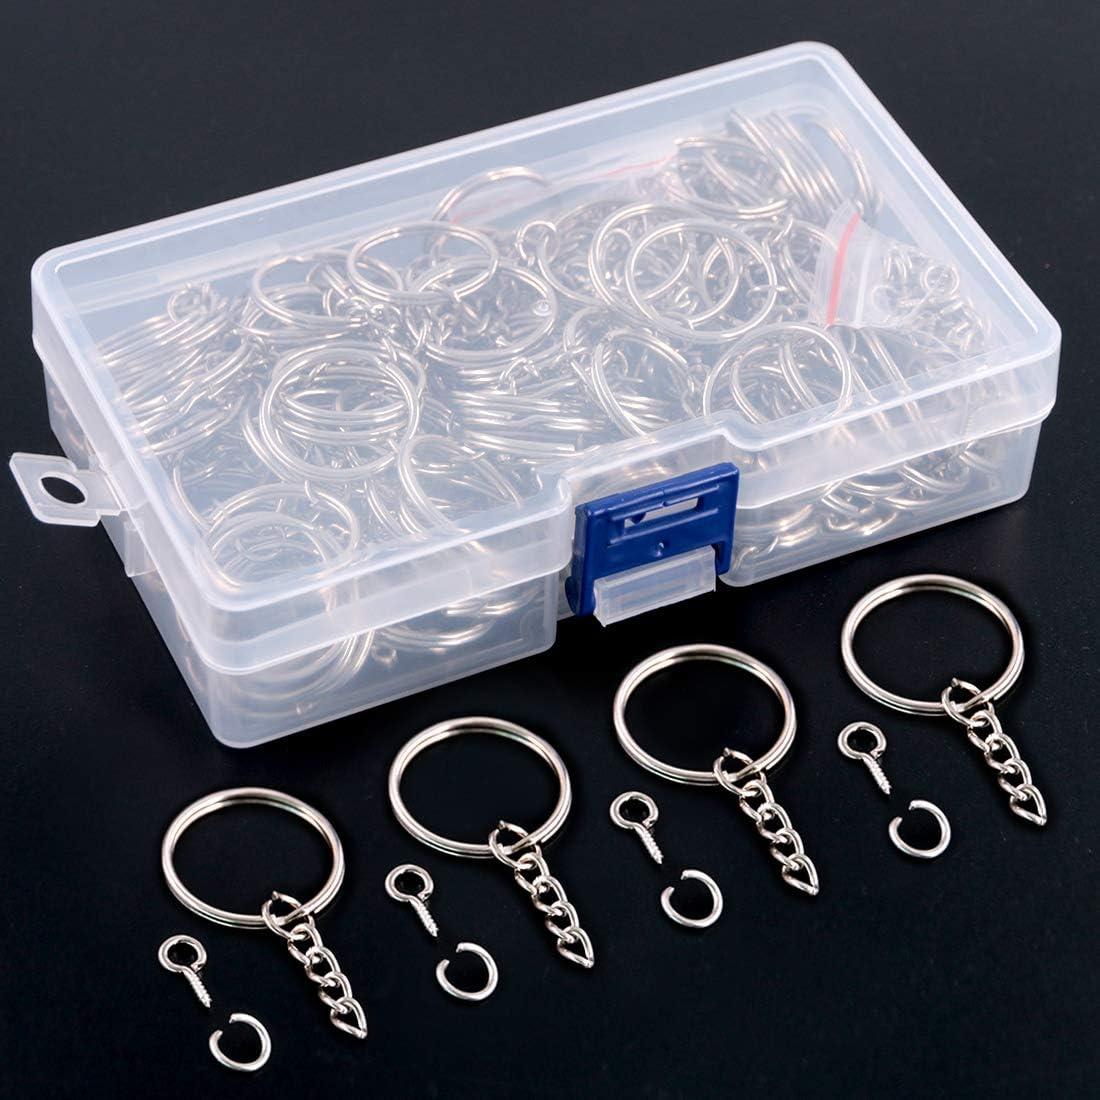 450pcs Keychain Rings, Rings Key Chain Split Metal Key Rings with Open Jump  Rings and Screw Eye Pins for Jewelry Making Craft 